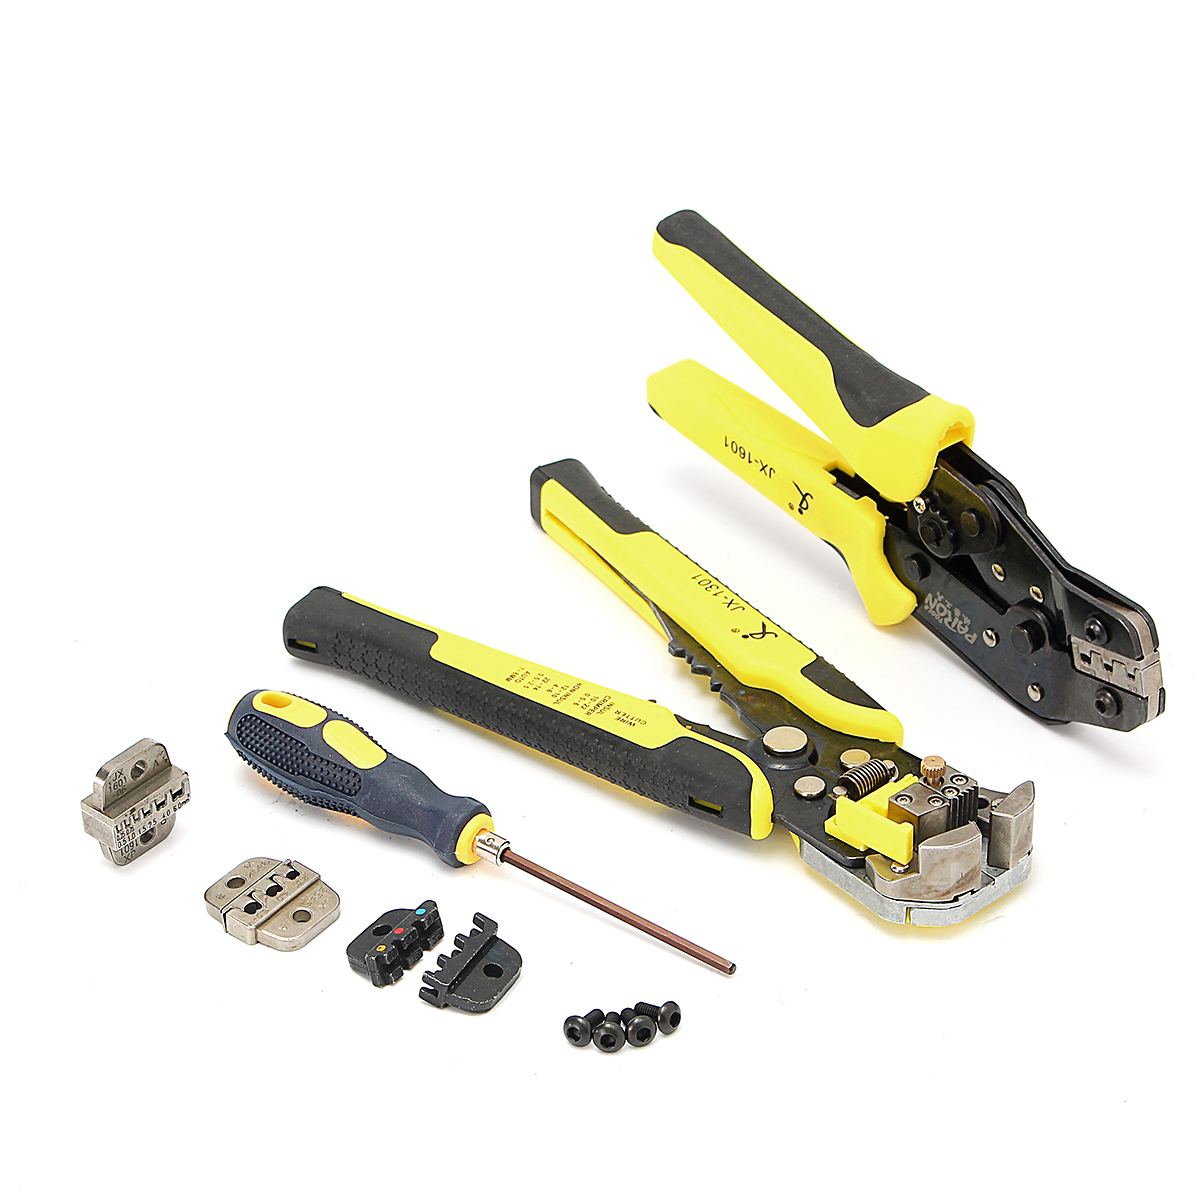 JX-D4301-Wire-Crimpers-Engineering-Ratcheting-Terminal-Crimping-Pliers-Tool-Set-1193651-9